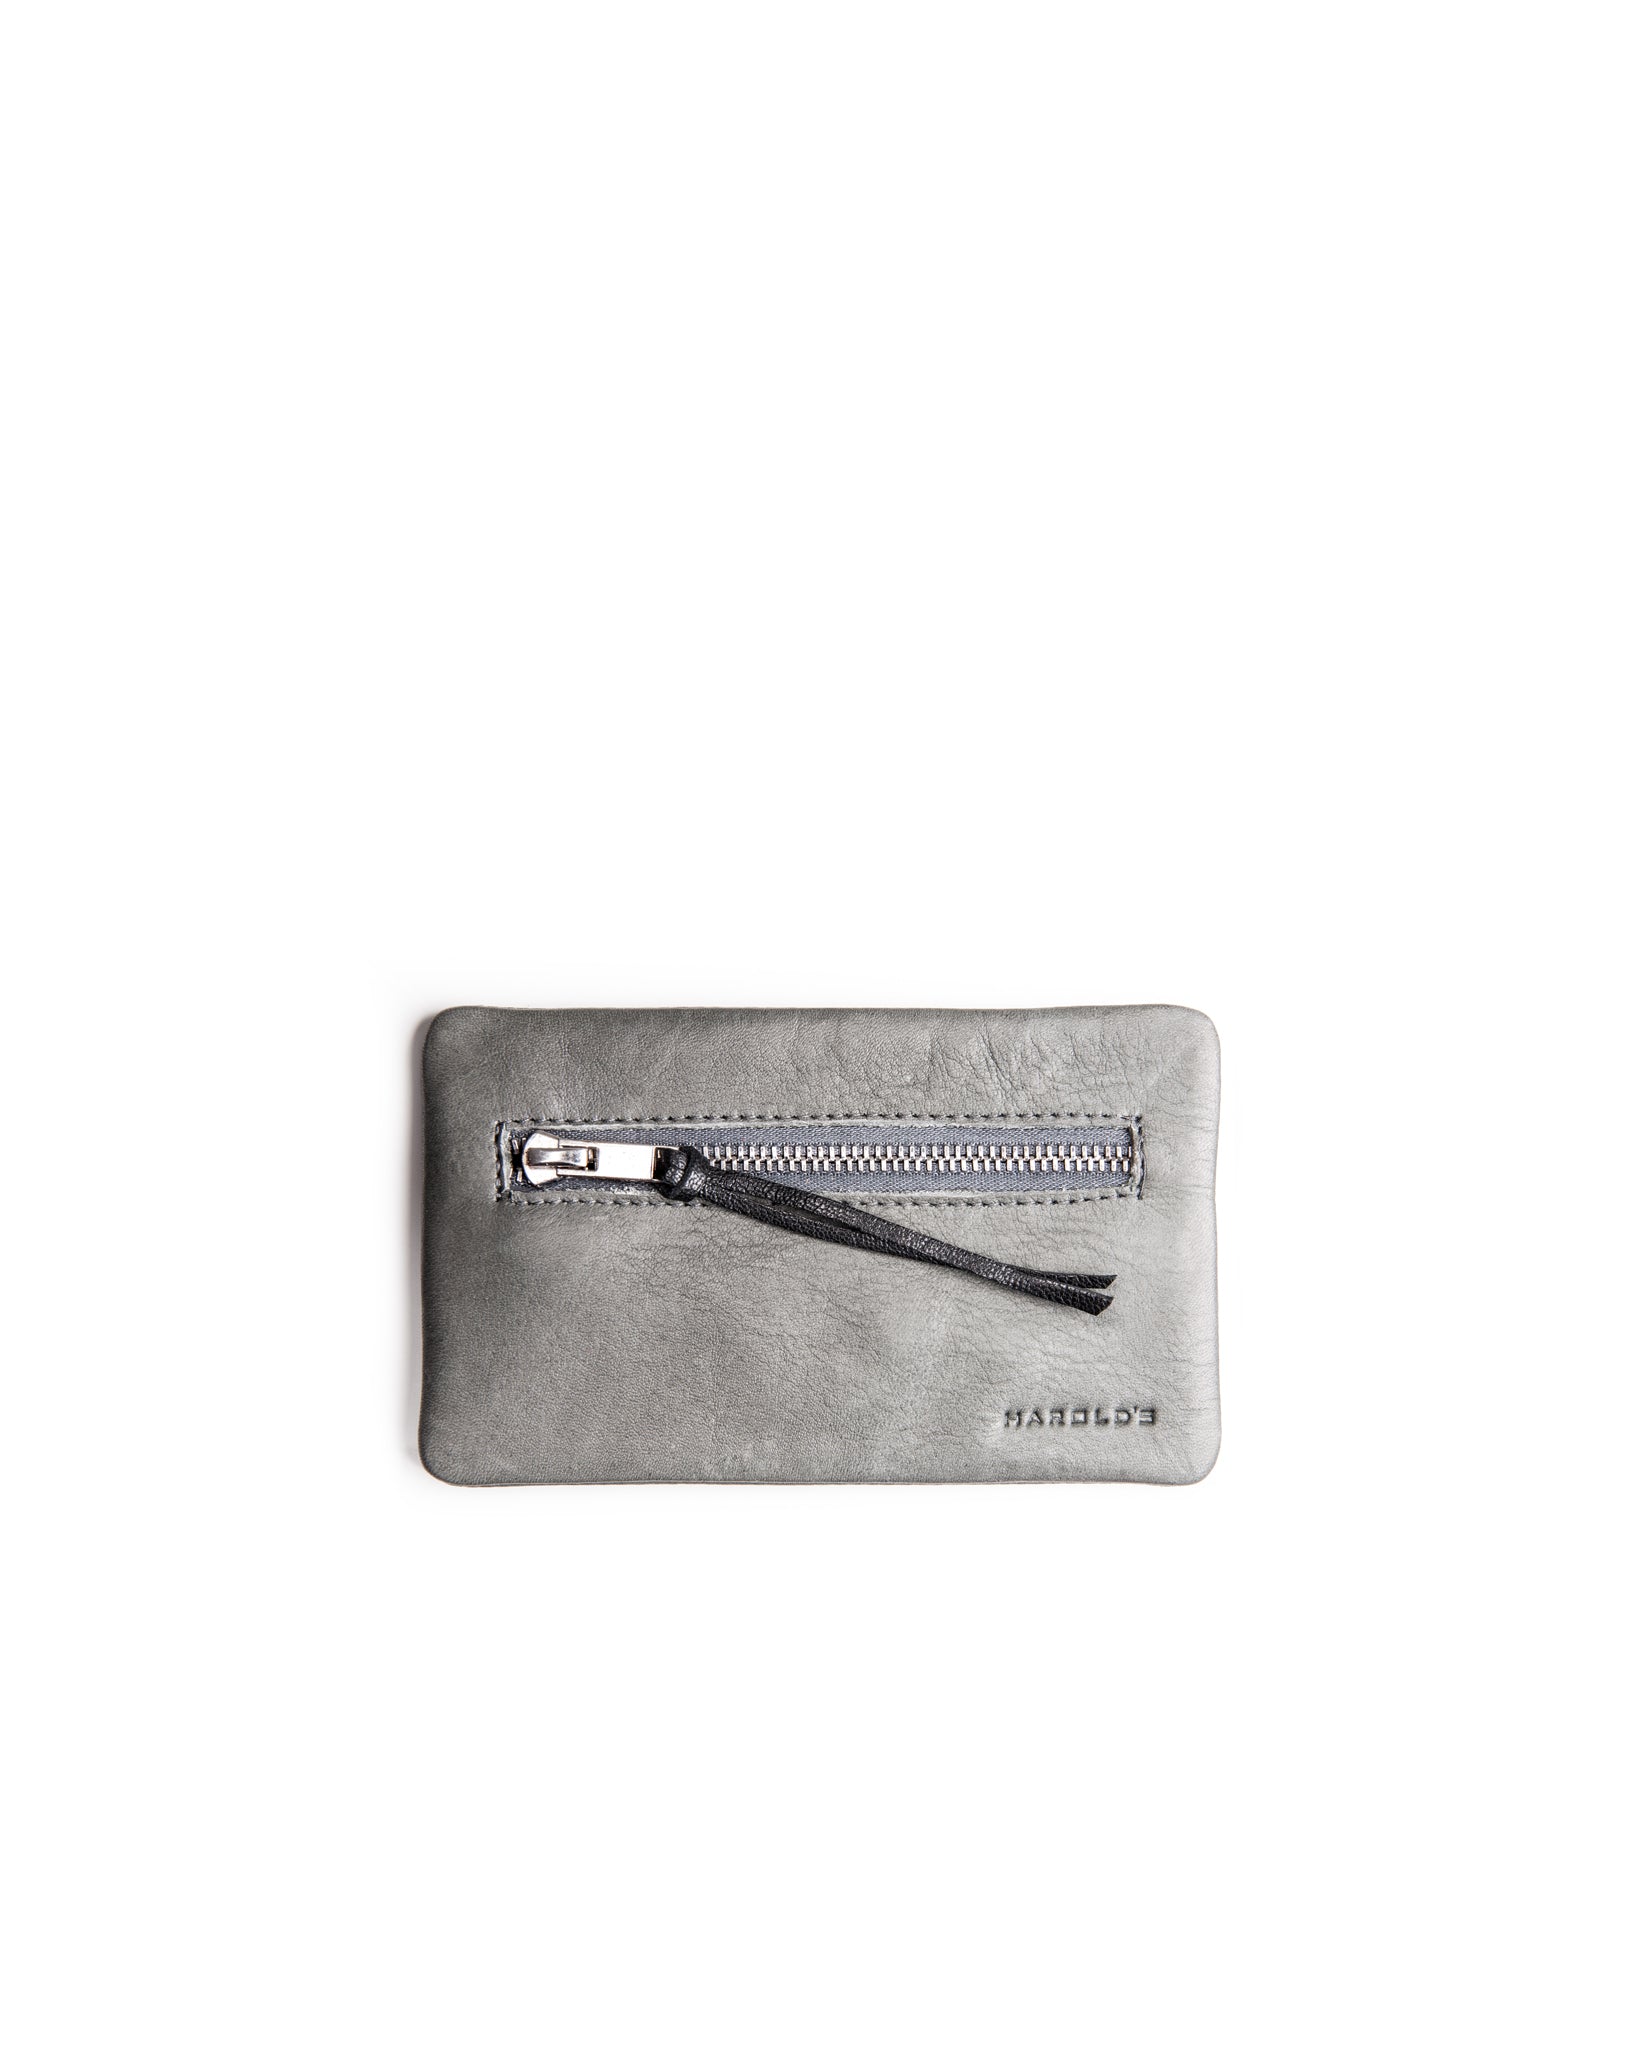 soft wallet key & coin case